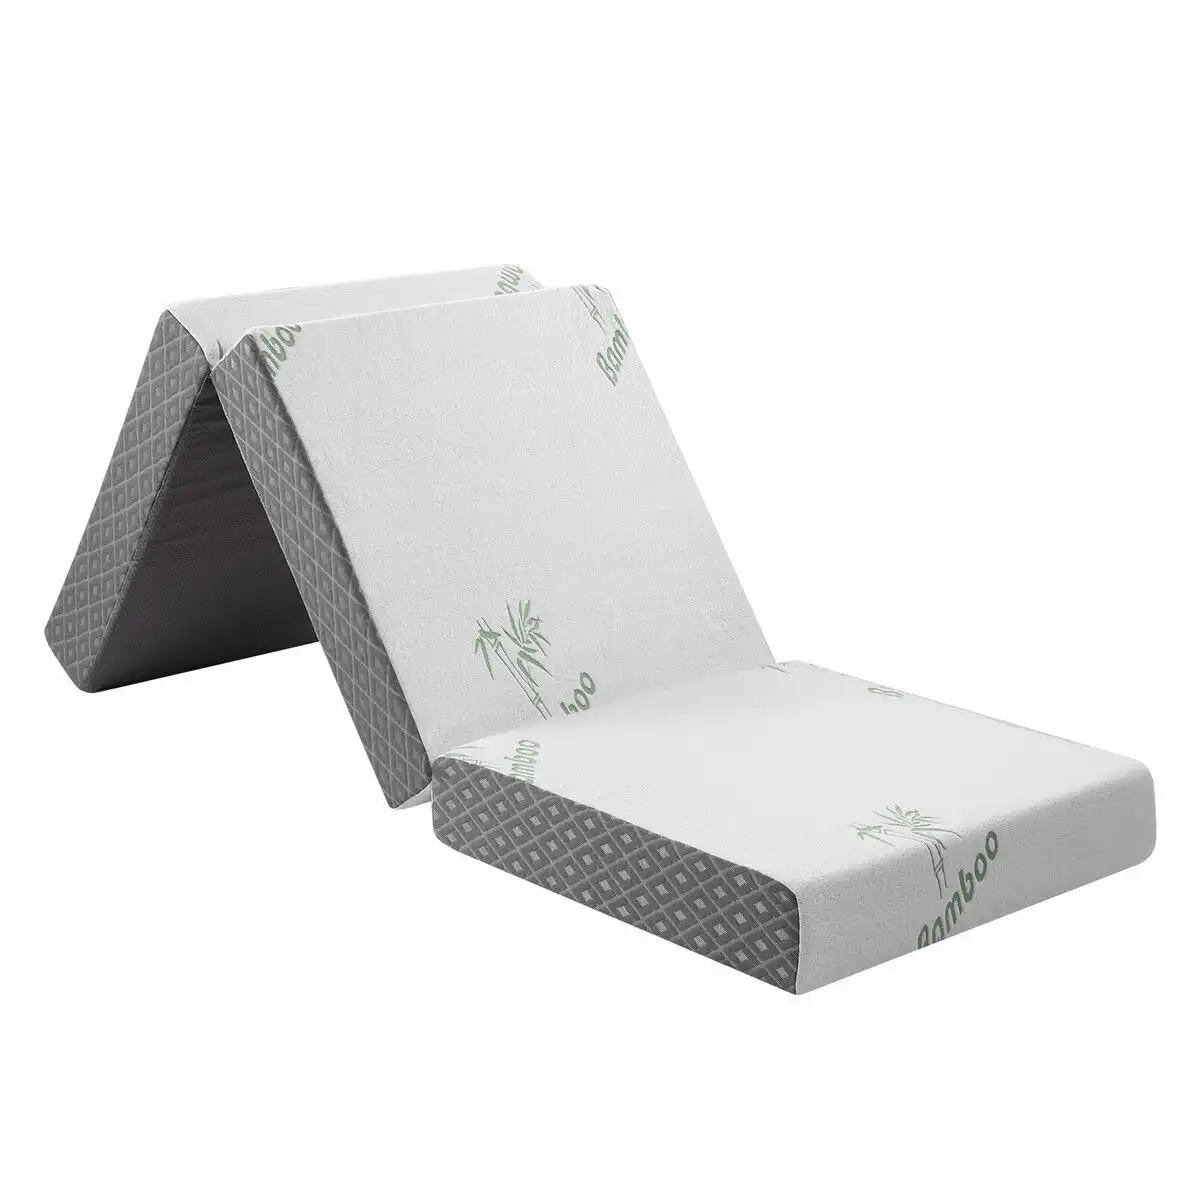 Luxdream Single Foam Mattress Trifold Sofa Bed Folding Camping Floor Portable Sleeping Mat Cushion with Removable Bamboo Cover